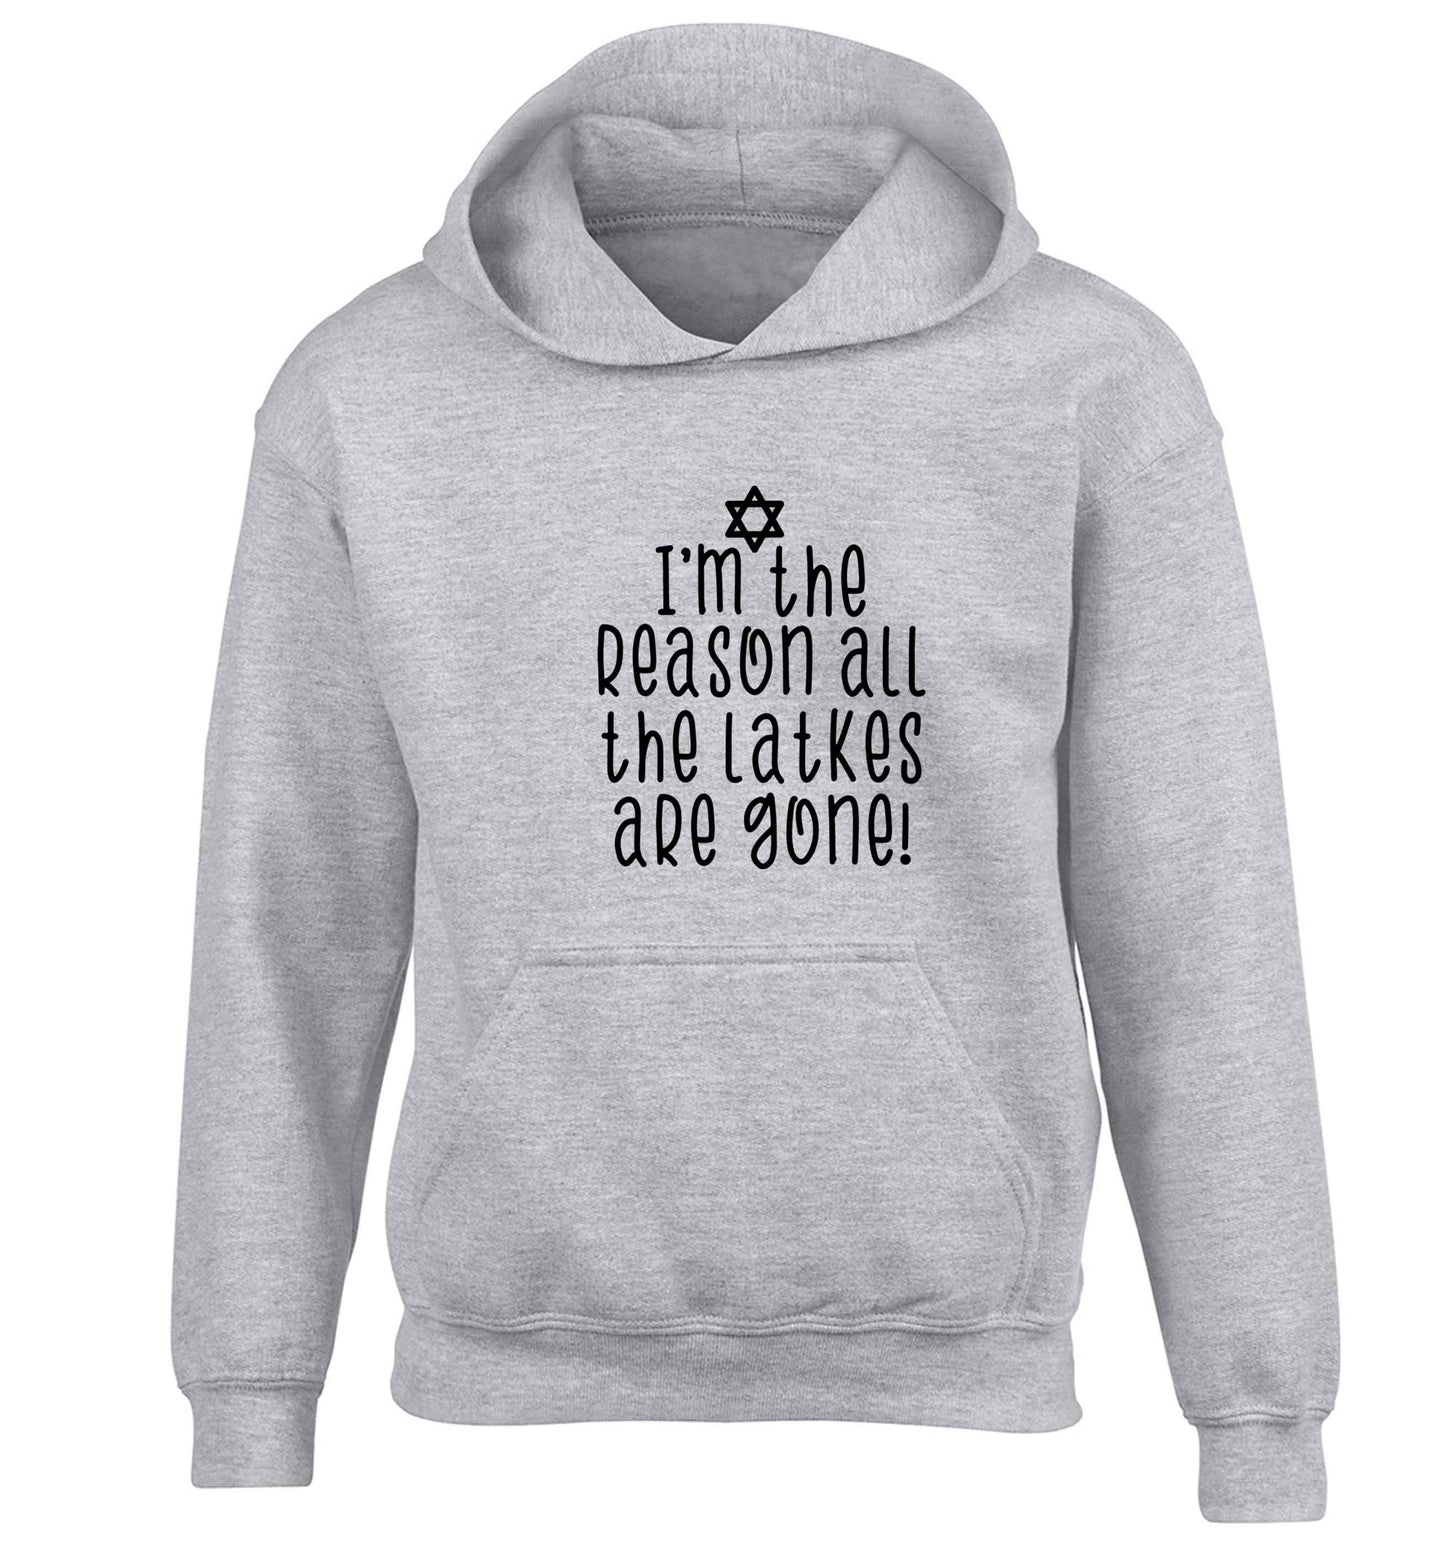 I'm the reason all the latkes are gone children's grey hoodie 12-13 Years